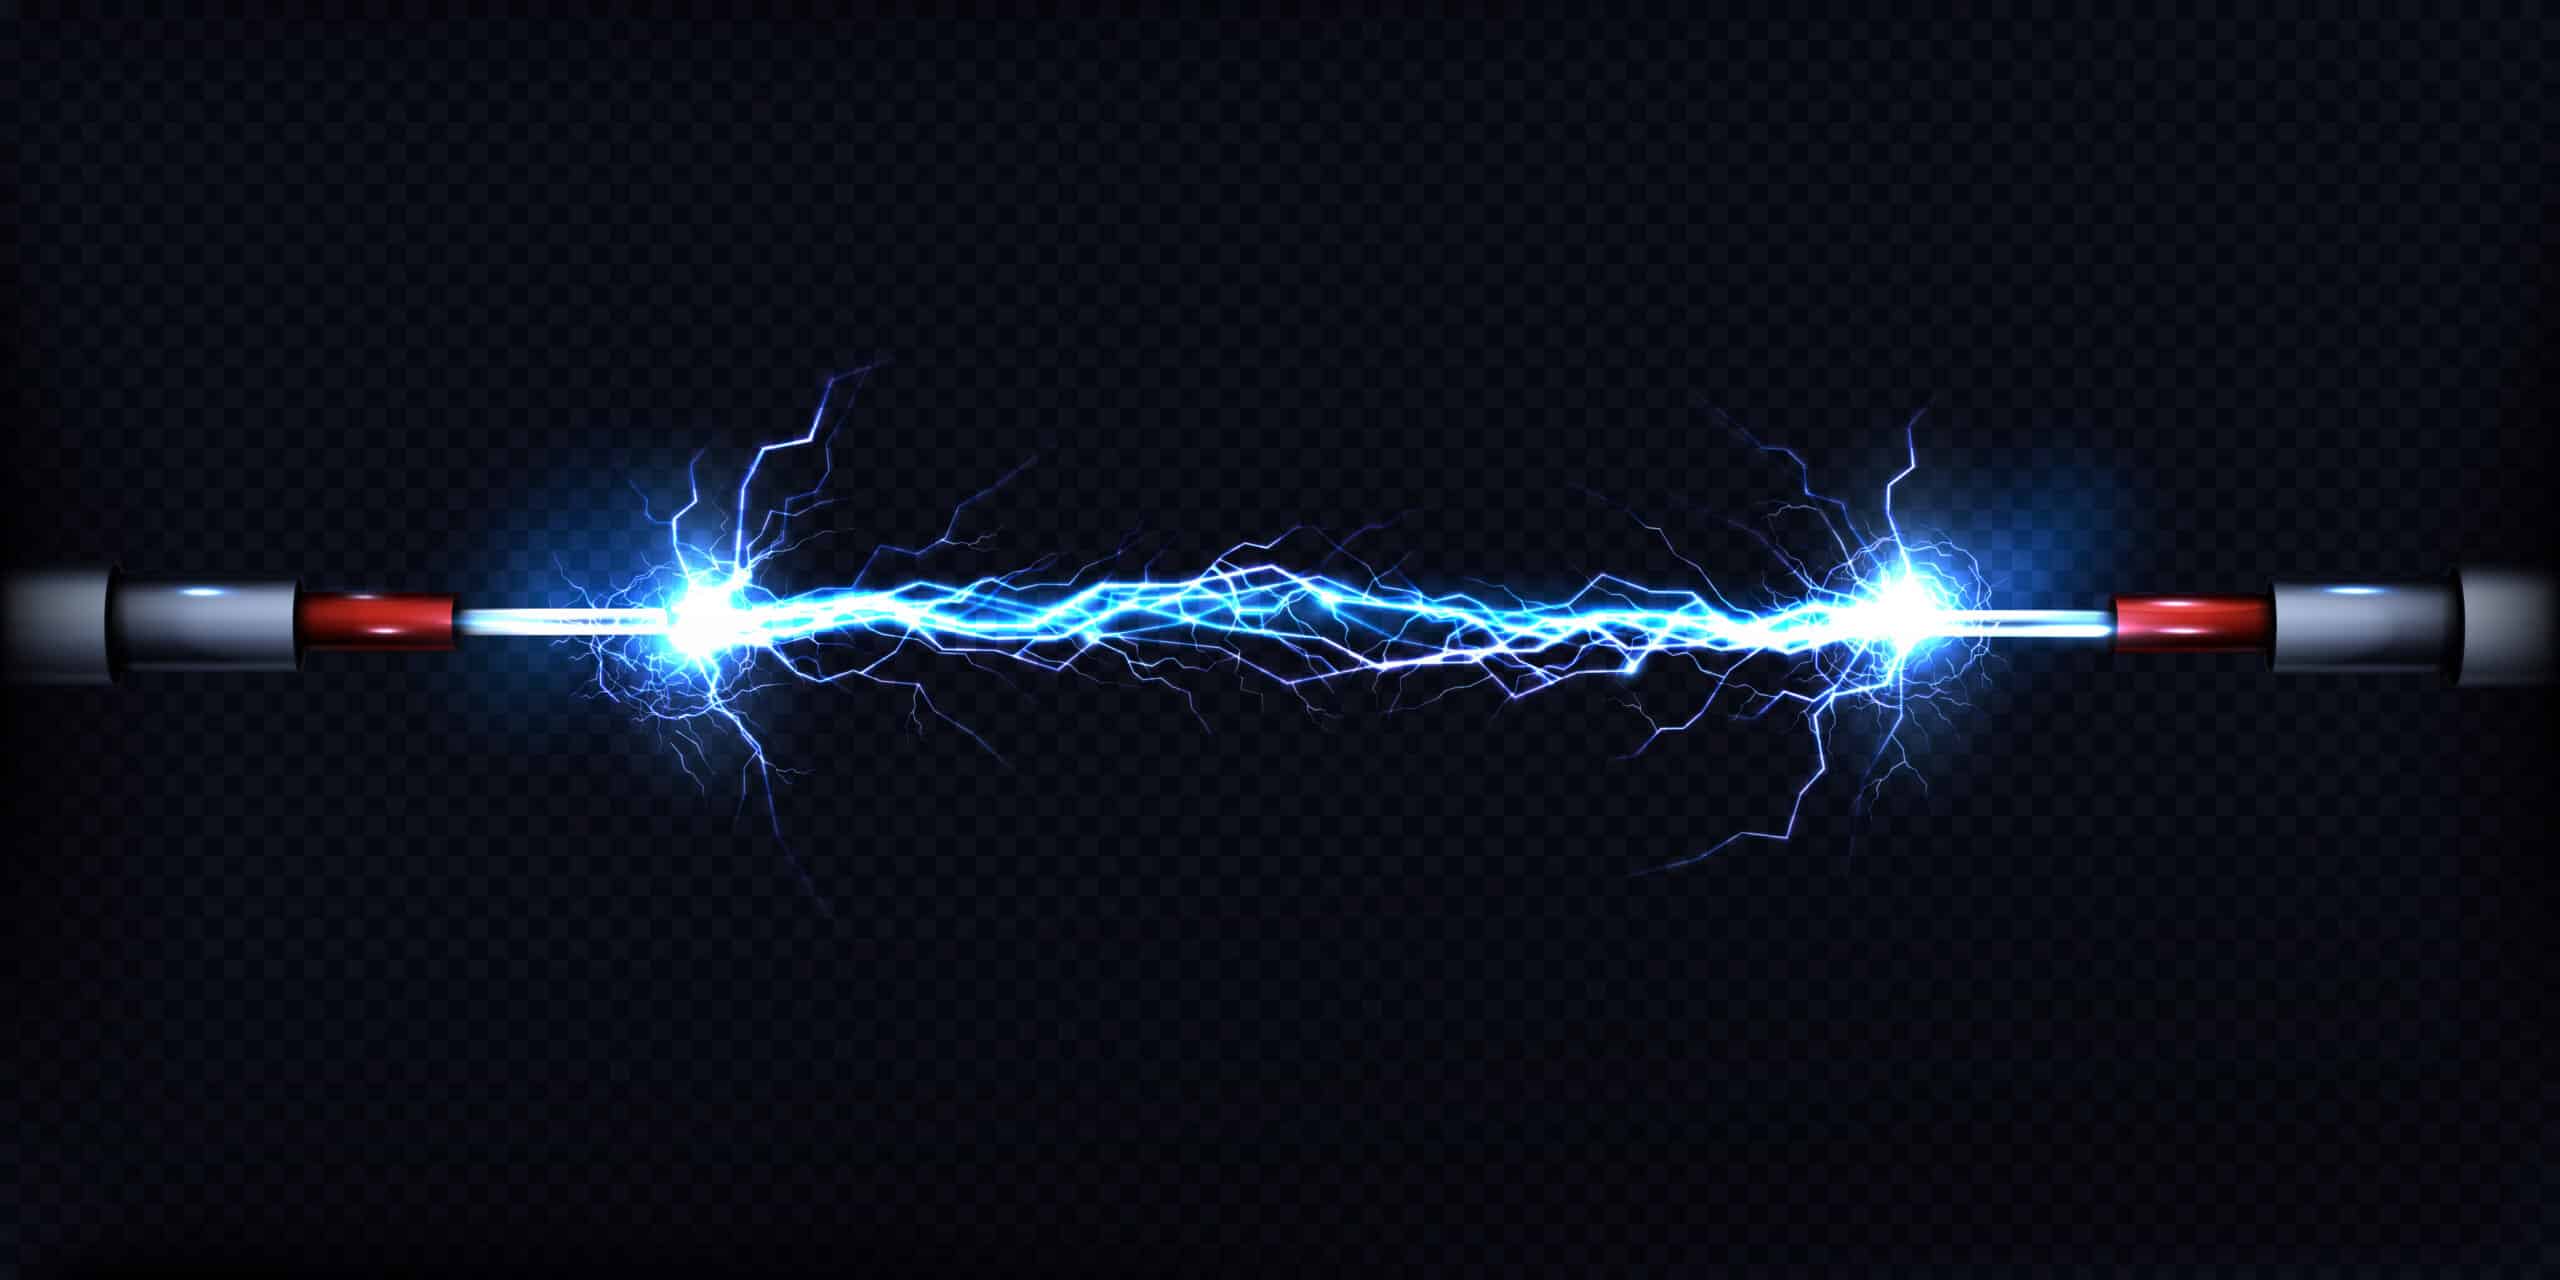 An image of an Electrical discharge between power cables vector